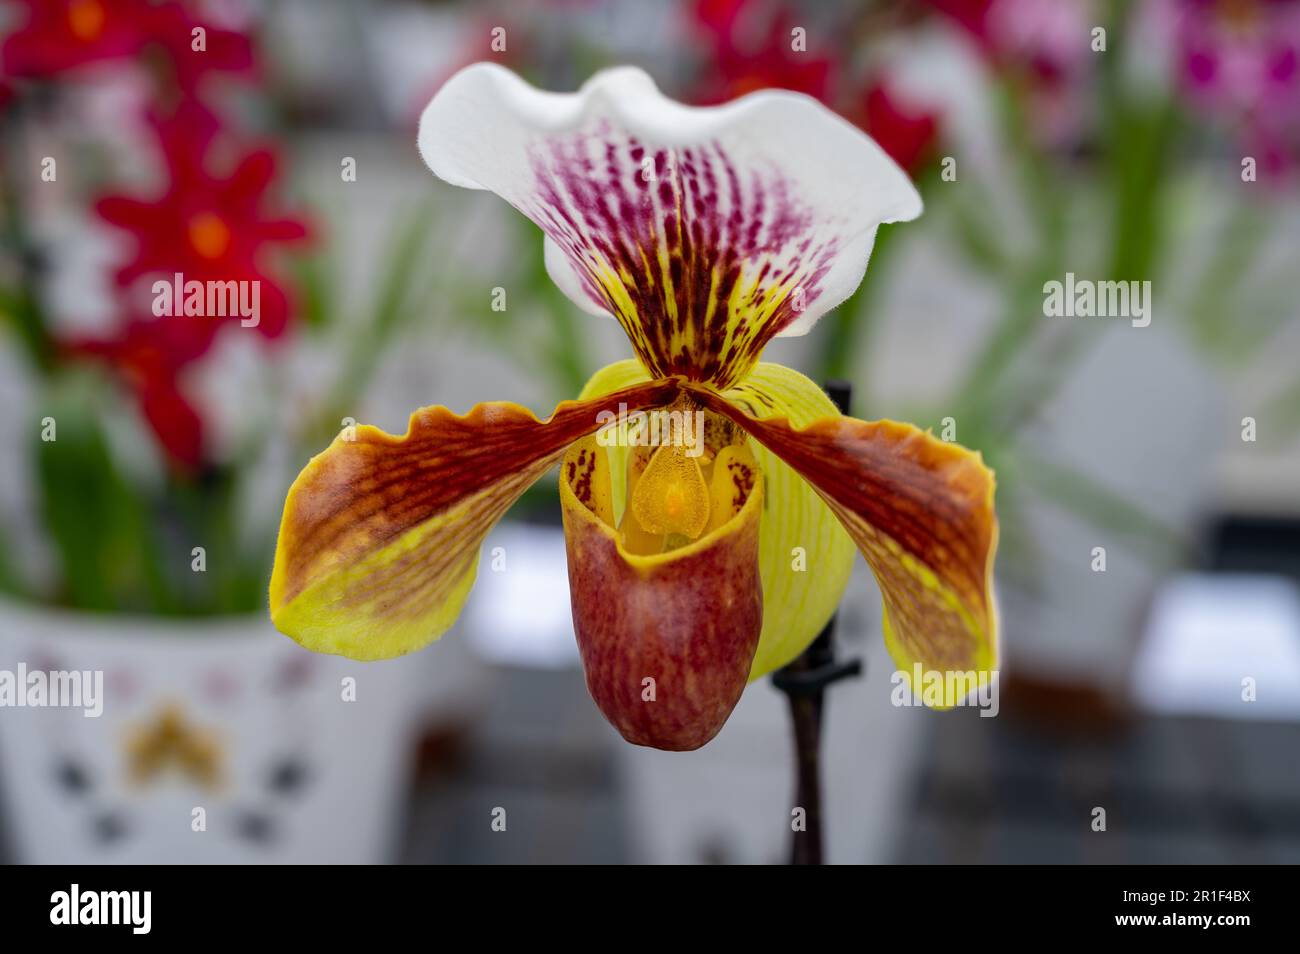 Cultivation of colorful tropical flowering plants orchid family Orchidaceae Paphiopedilum, Venus slipper in Dutch greenhouse with UV IR Grow Light Stock Photo